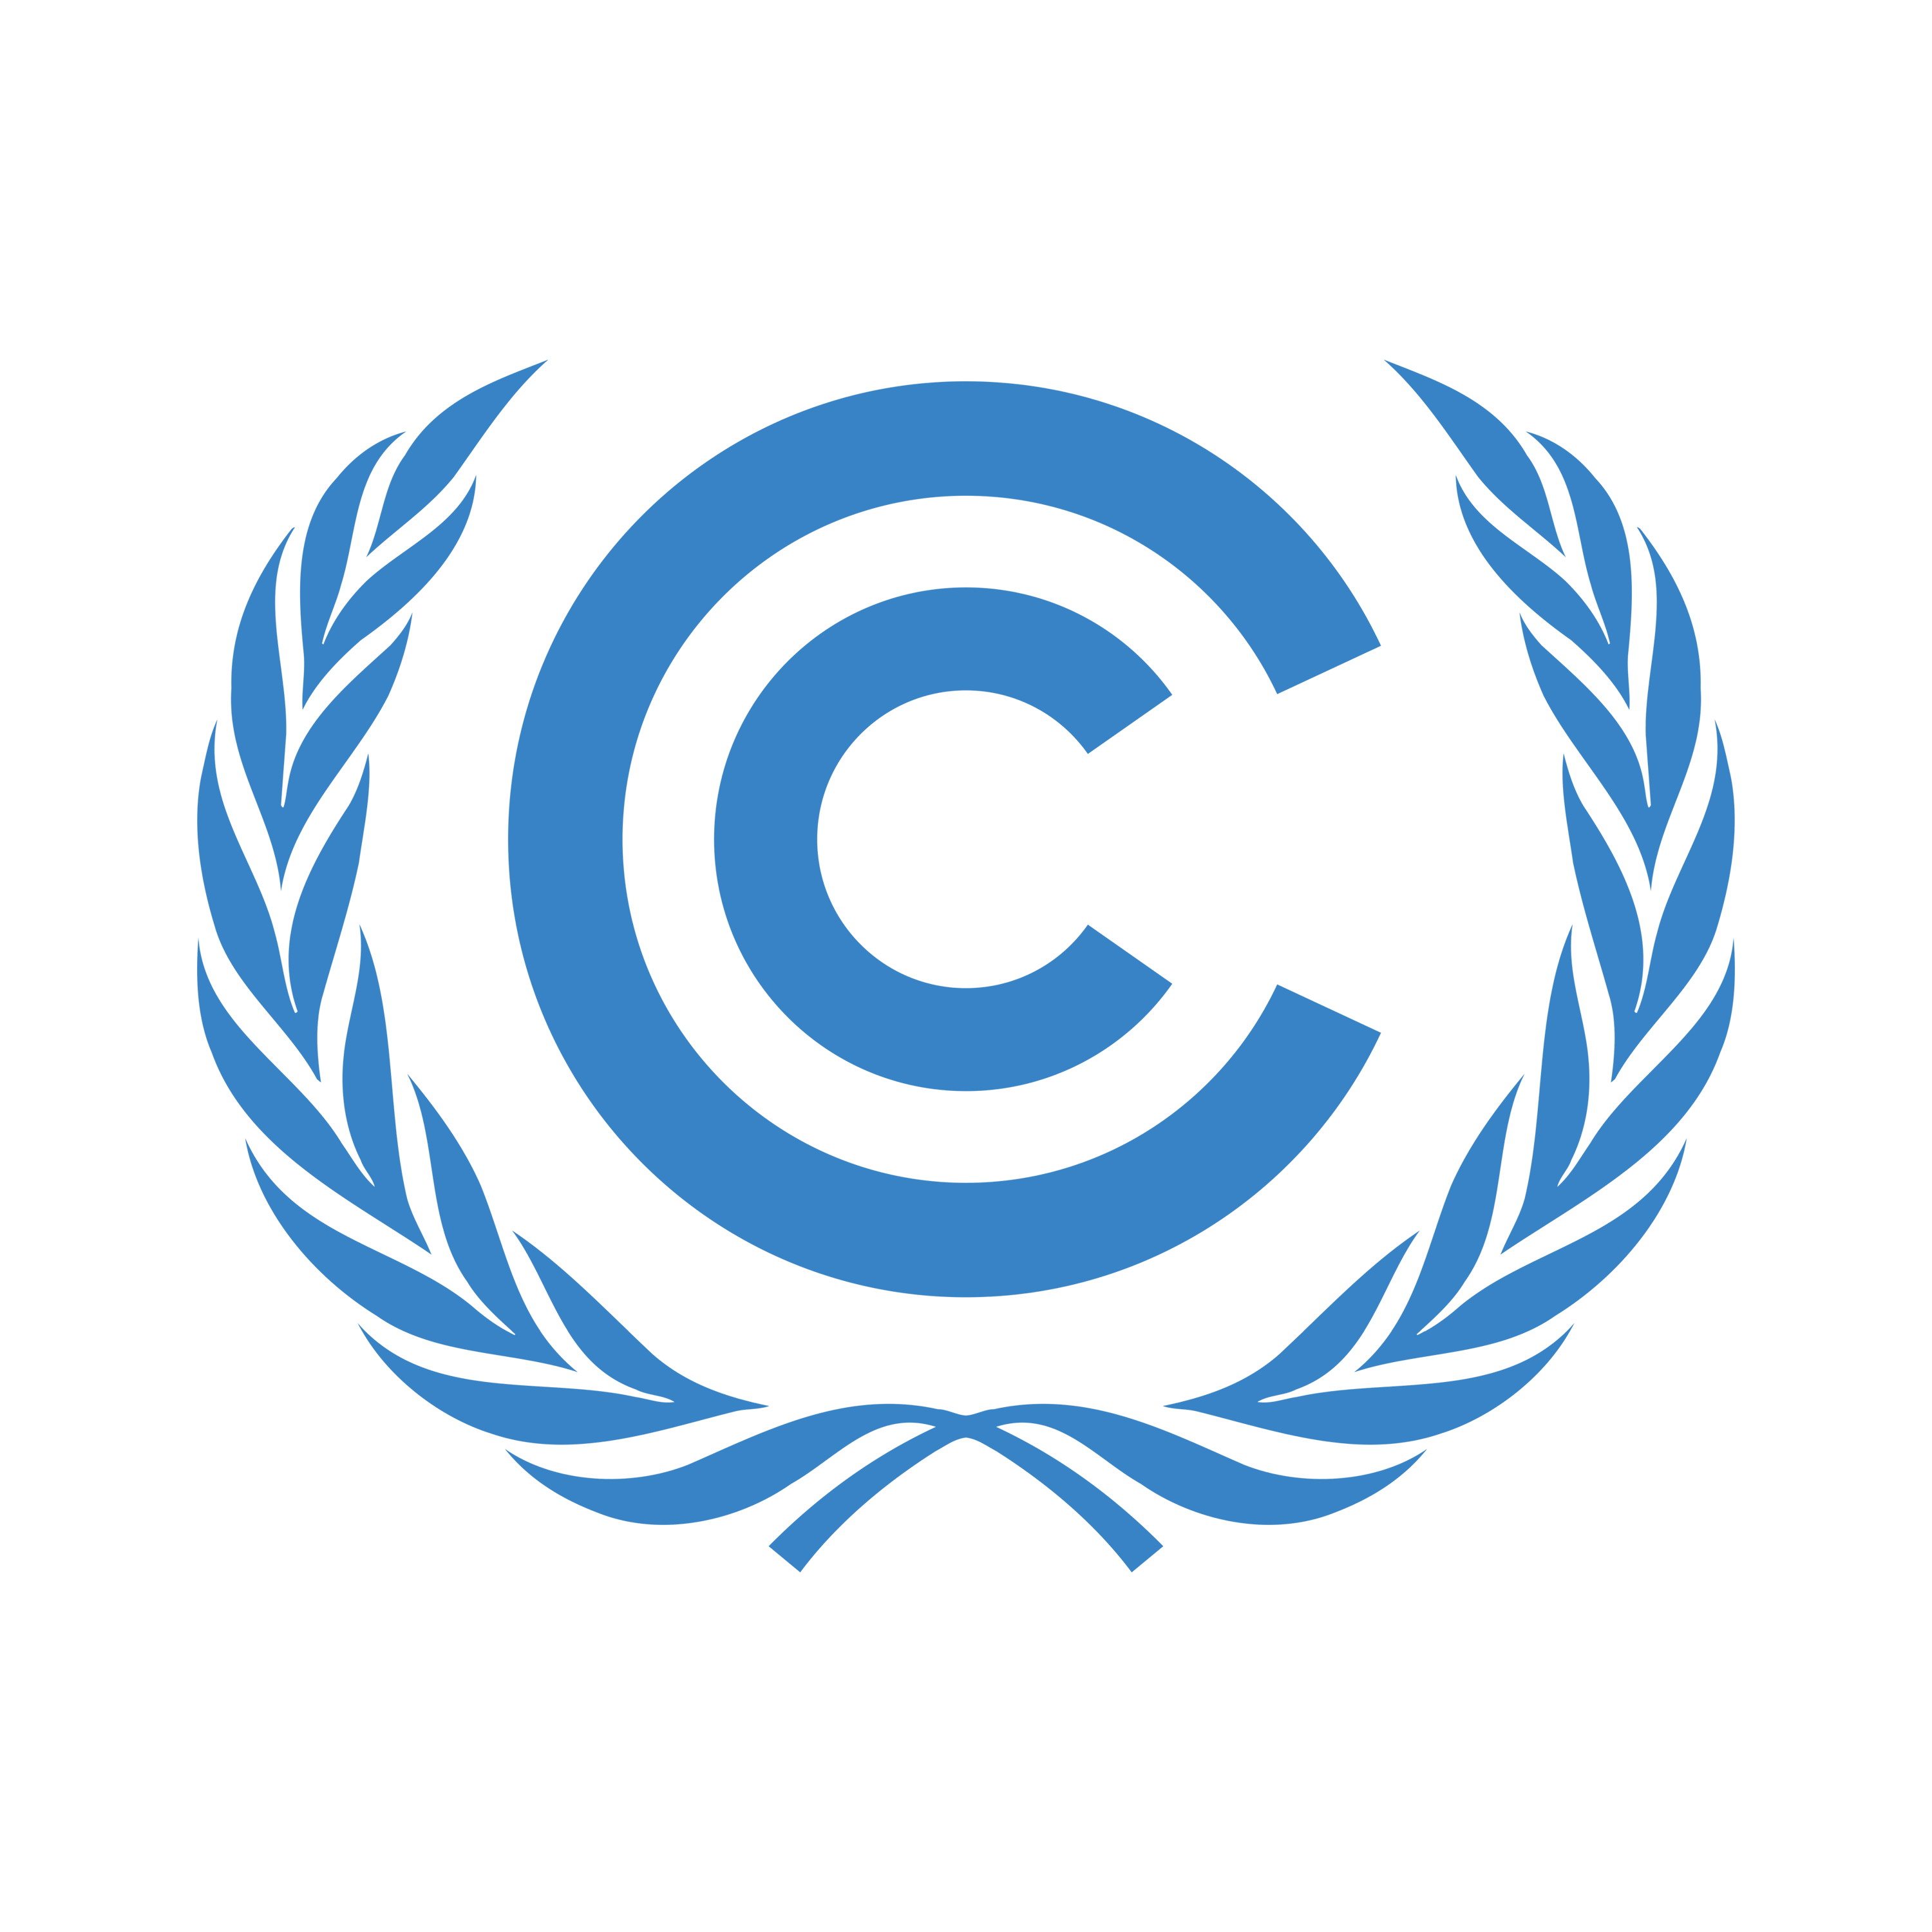 United Nations Climate Change Conference Logo Transparent Picture